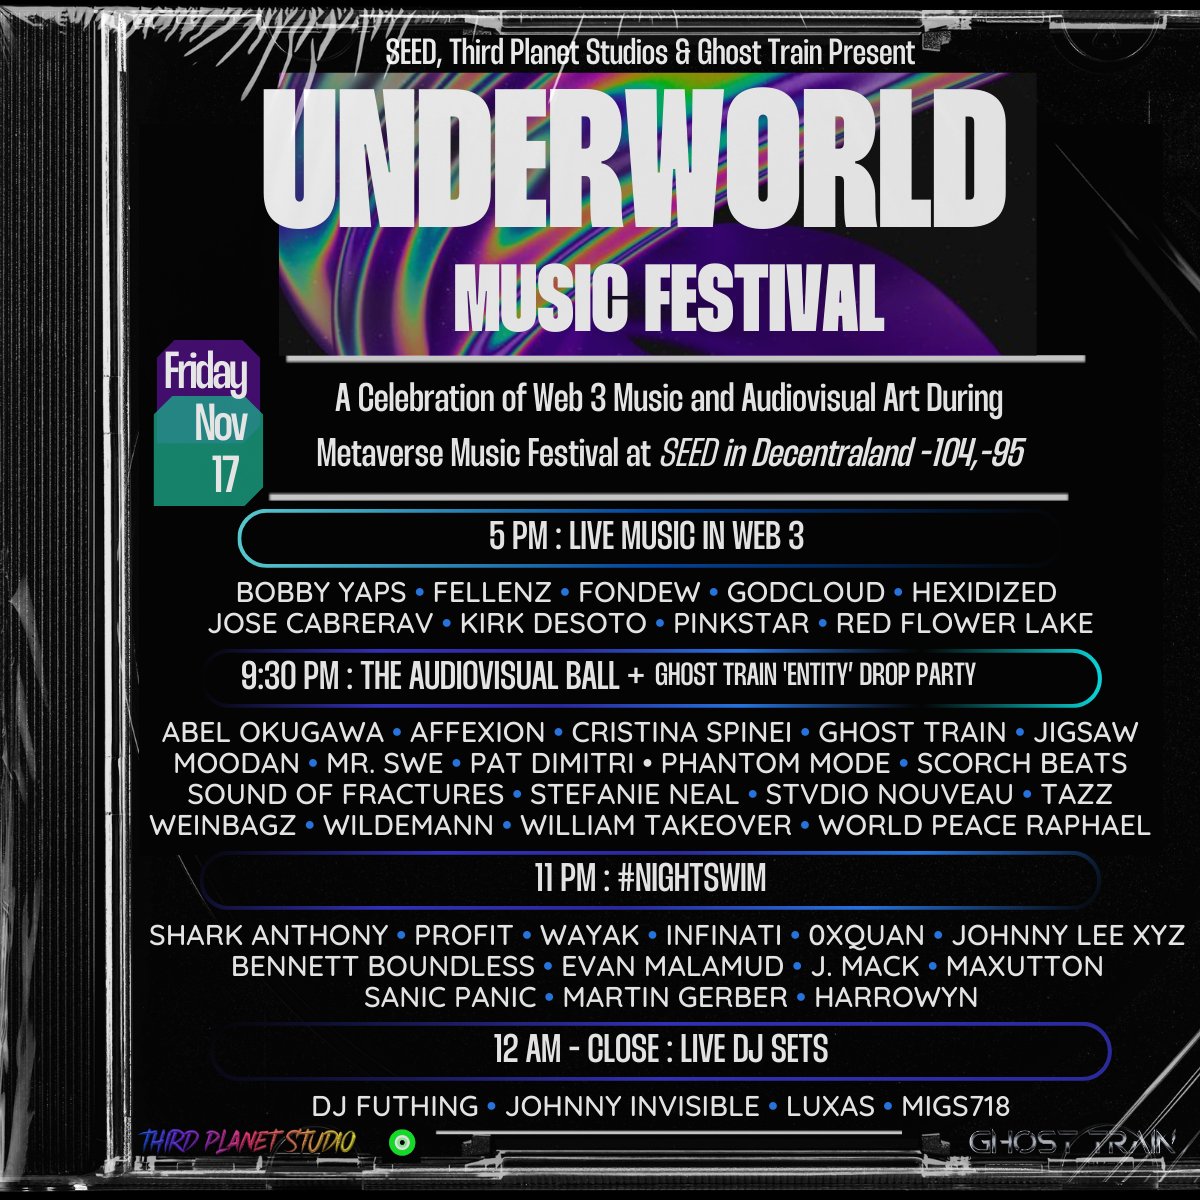 📣Announcing UNDERWORLD MUSIC FESTIVAL An Epic Virtual Music Event celebrating Web 3 Music & Audiovisual Art During Decentraland Music Festival 🔷This Friday, Nov 17 at SEED 5pm - 1am EST 44 Artists. 4 events. Live Music, A/V Showcases & DJ Sets More details in the thread 👇